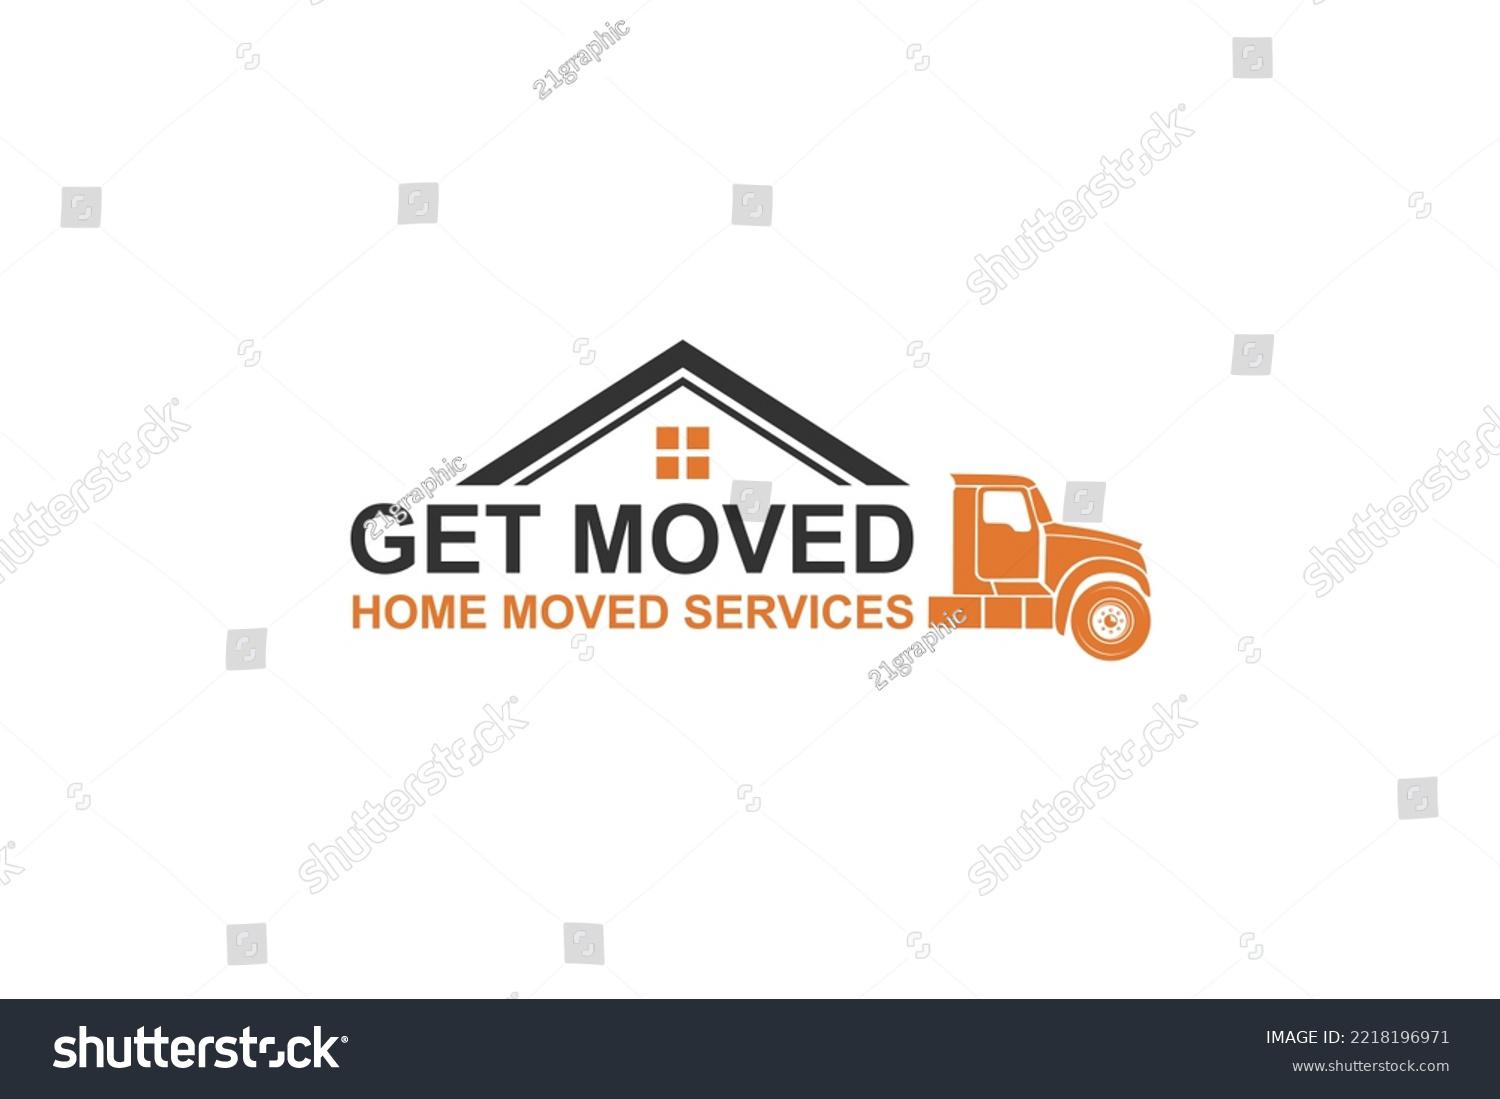 Room to Room Removals logo